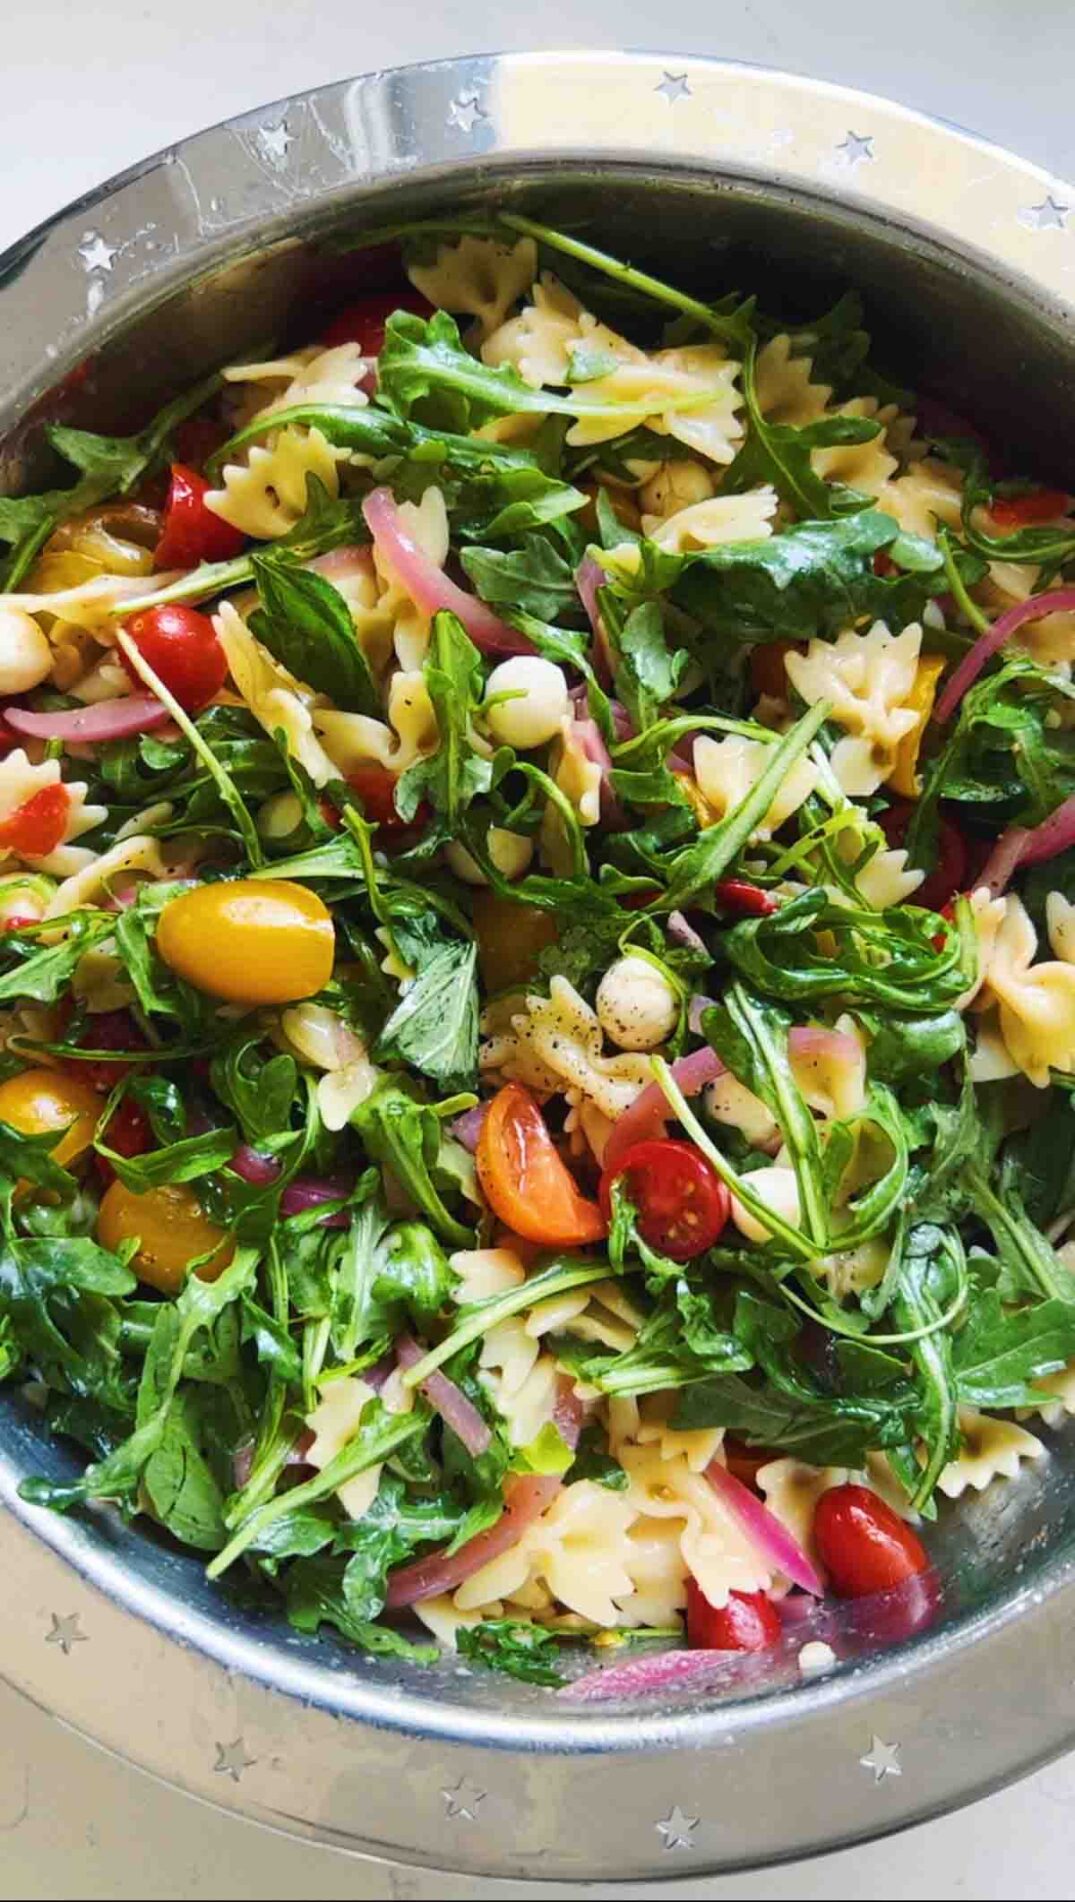 arugula and pasta salad ingredients in a big silver bowl.